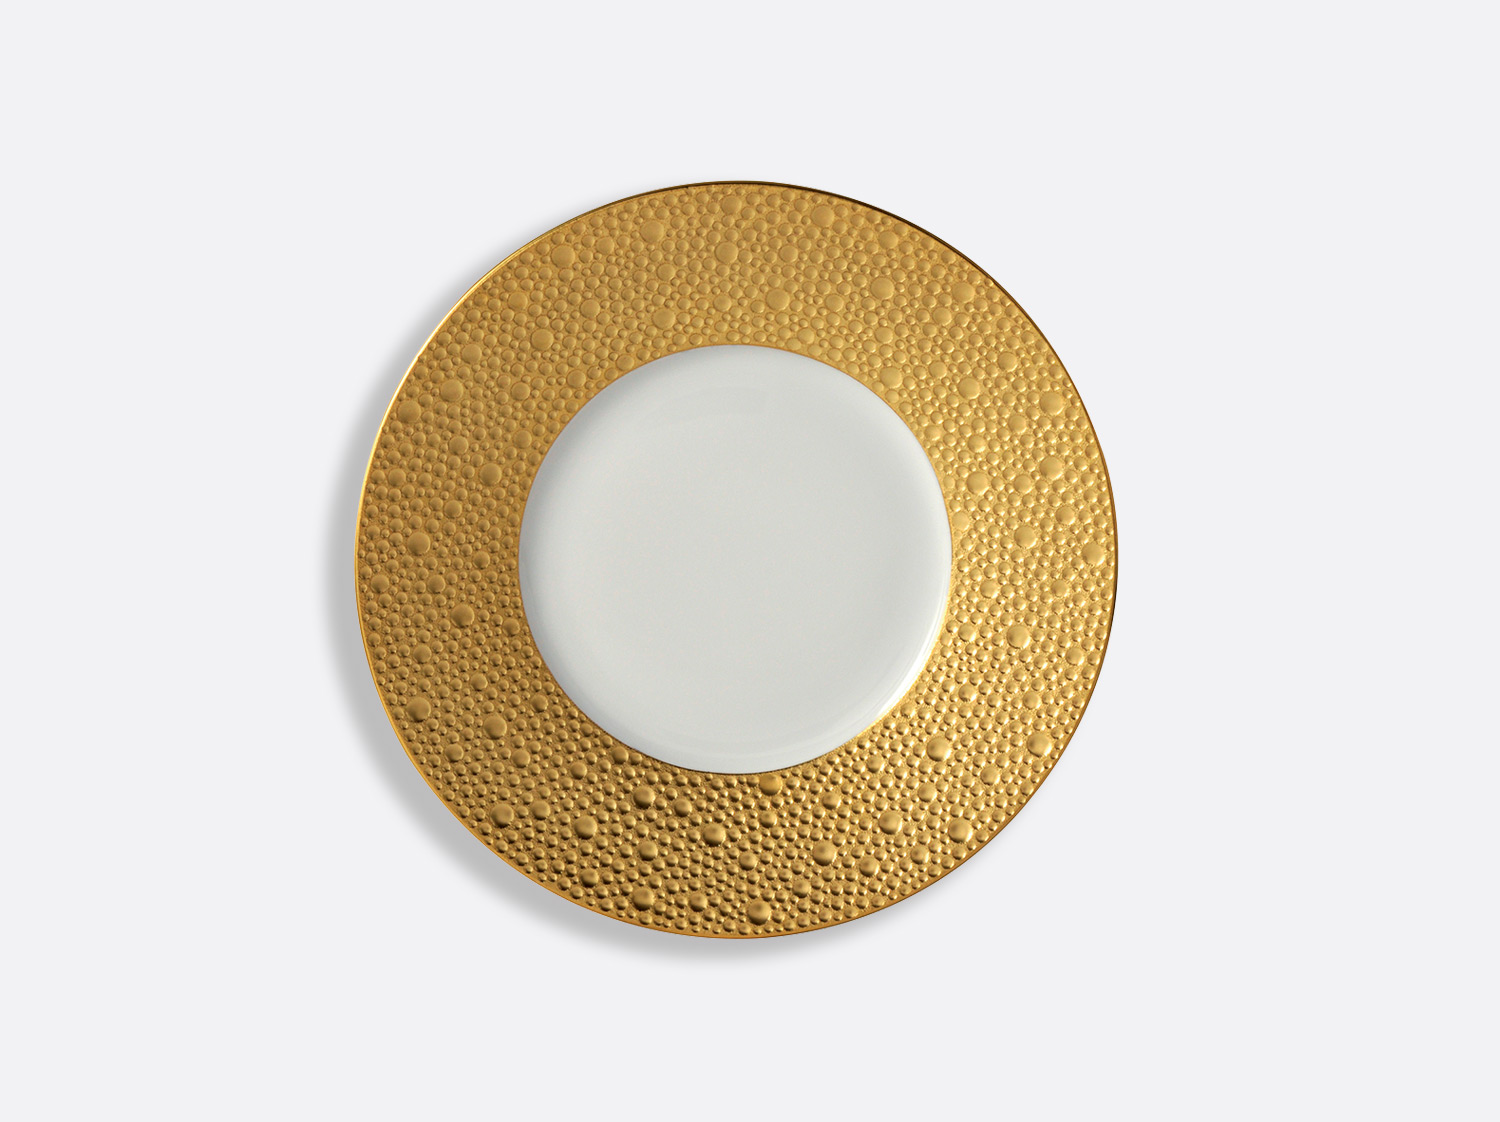 China Plate 16 cm of the collection Ecume gold | Bernardaud